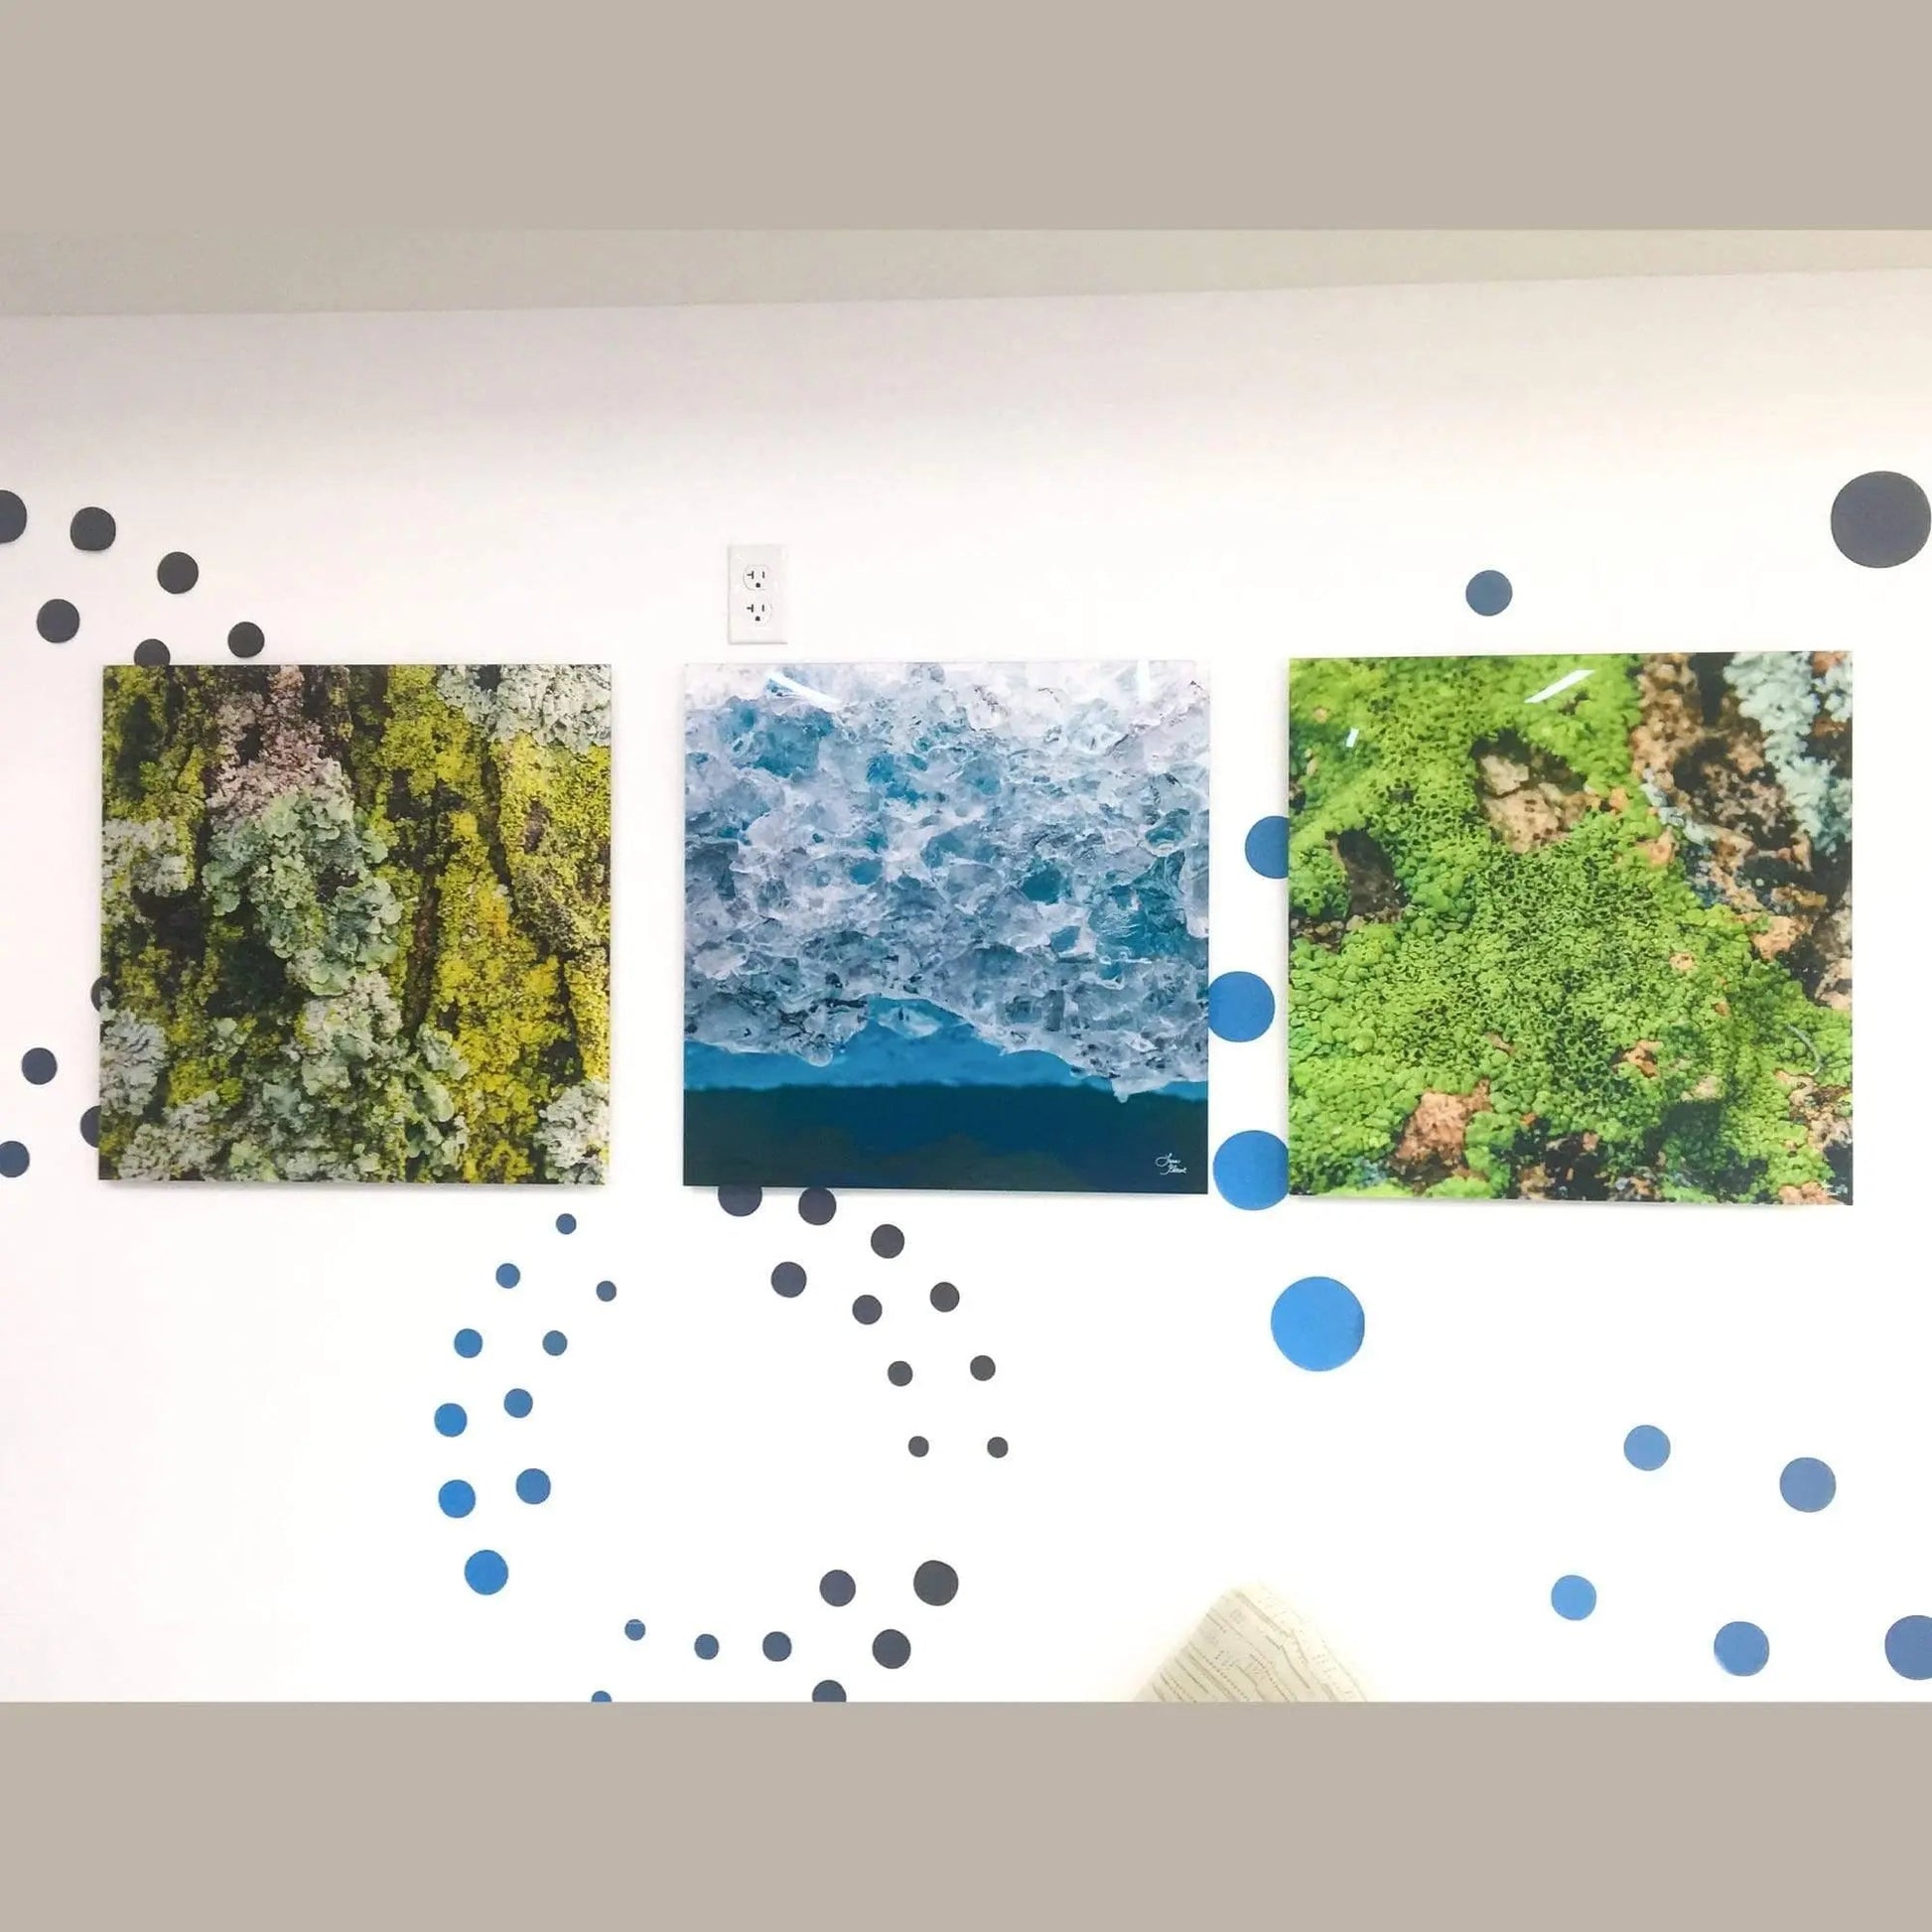 Art by Lisa Blount featured in dental office includes lichen and ice